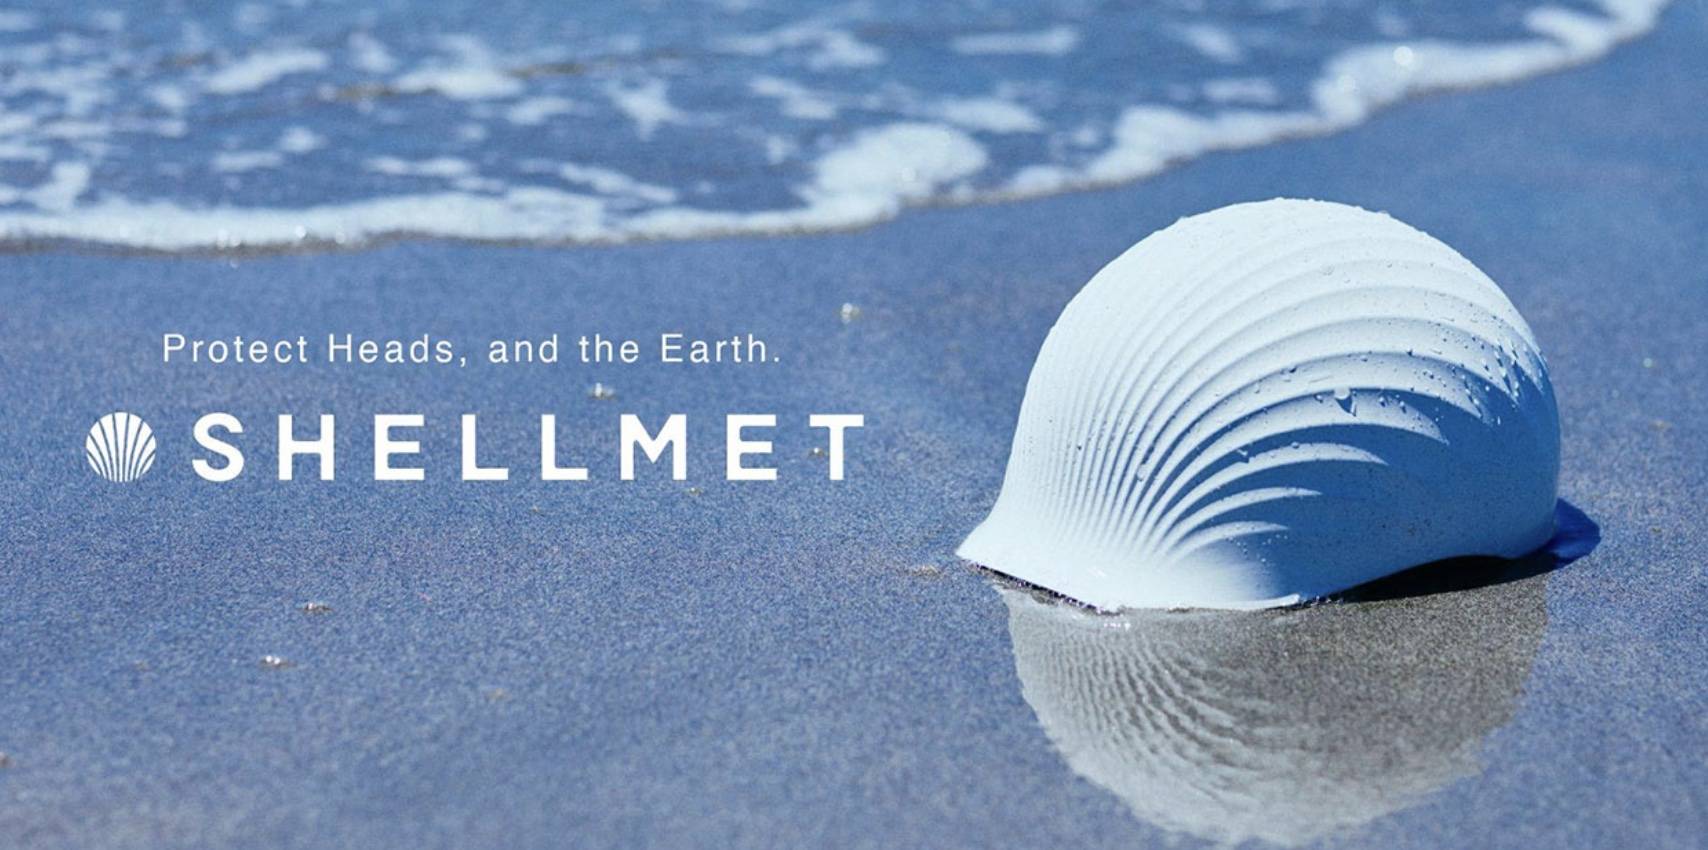 Image of a shell in the form of a helmet on the beach with waves in the background. To the left of the helmet in white copy reads "Protect Heads, and the Earth. Shellmet"